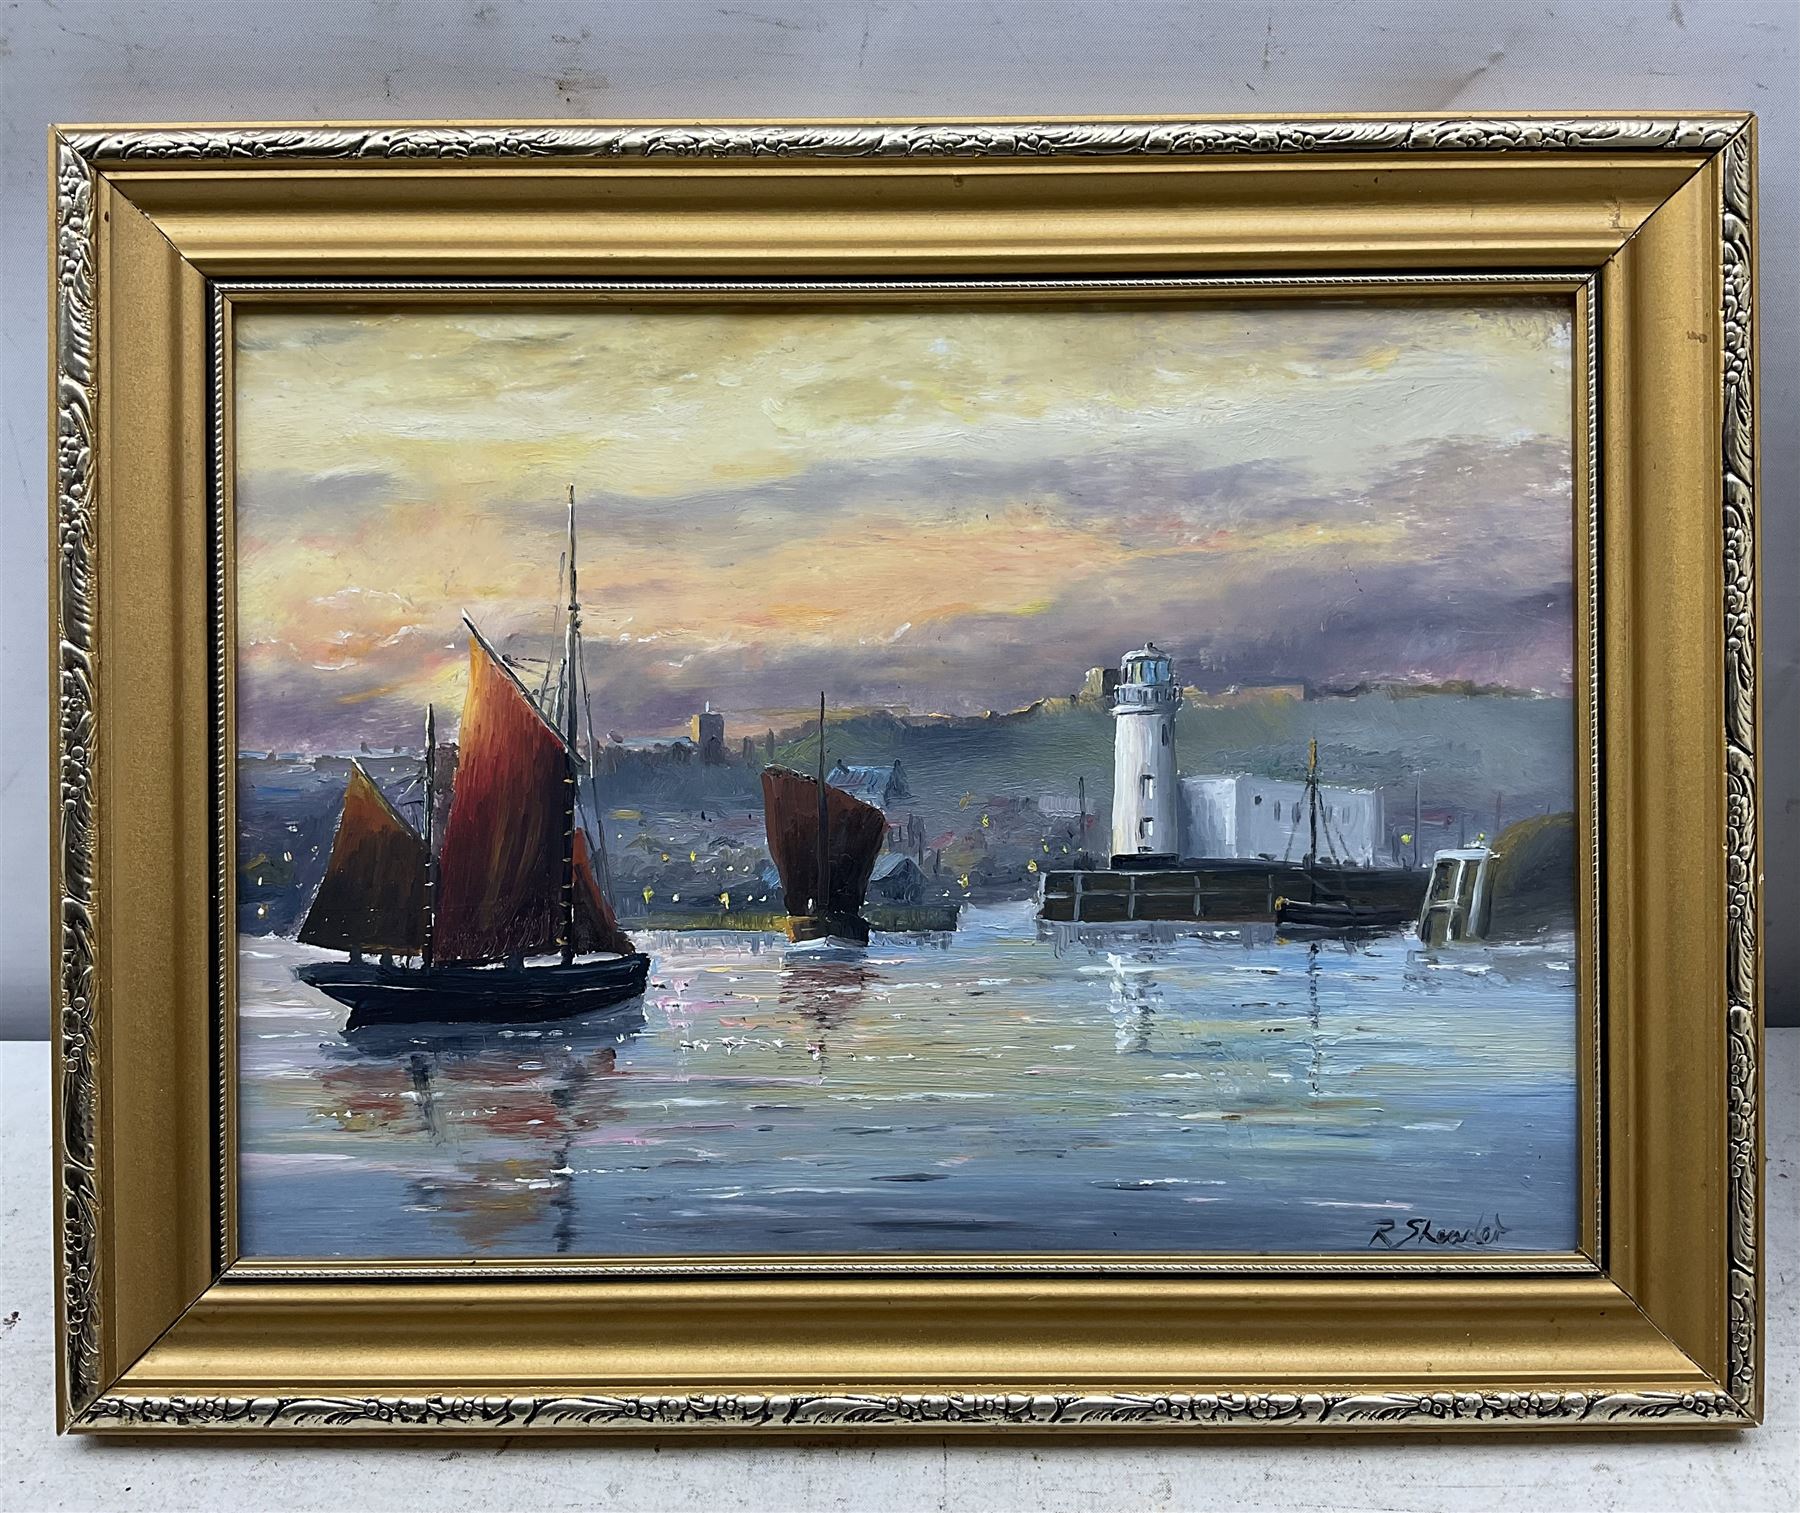 Robert Sheader (British 20th century): Scarborough Harbour at Sunset with Calm Seas - Image 2 of 2